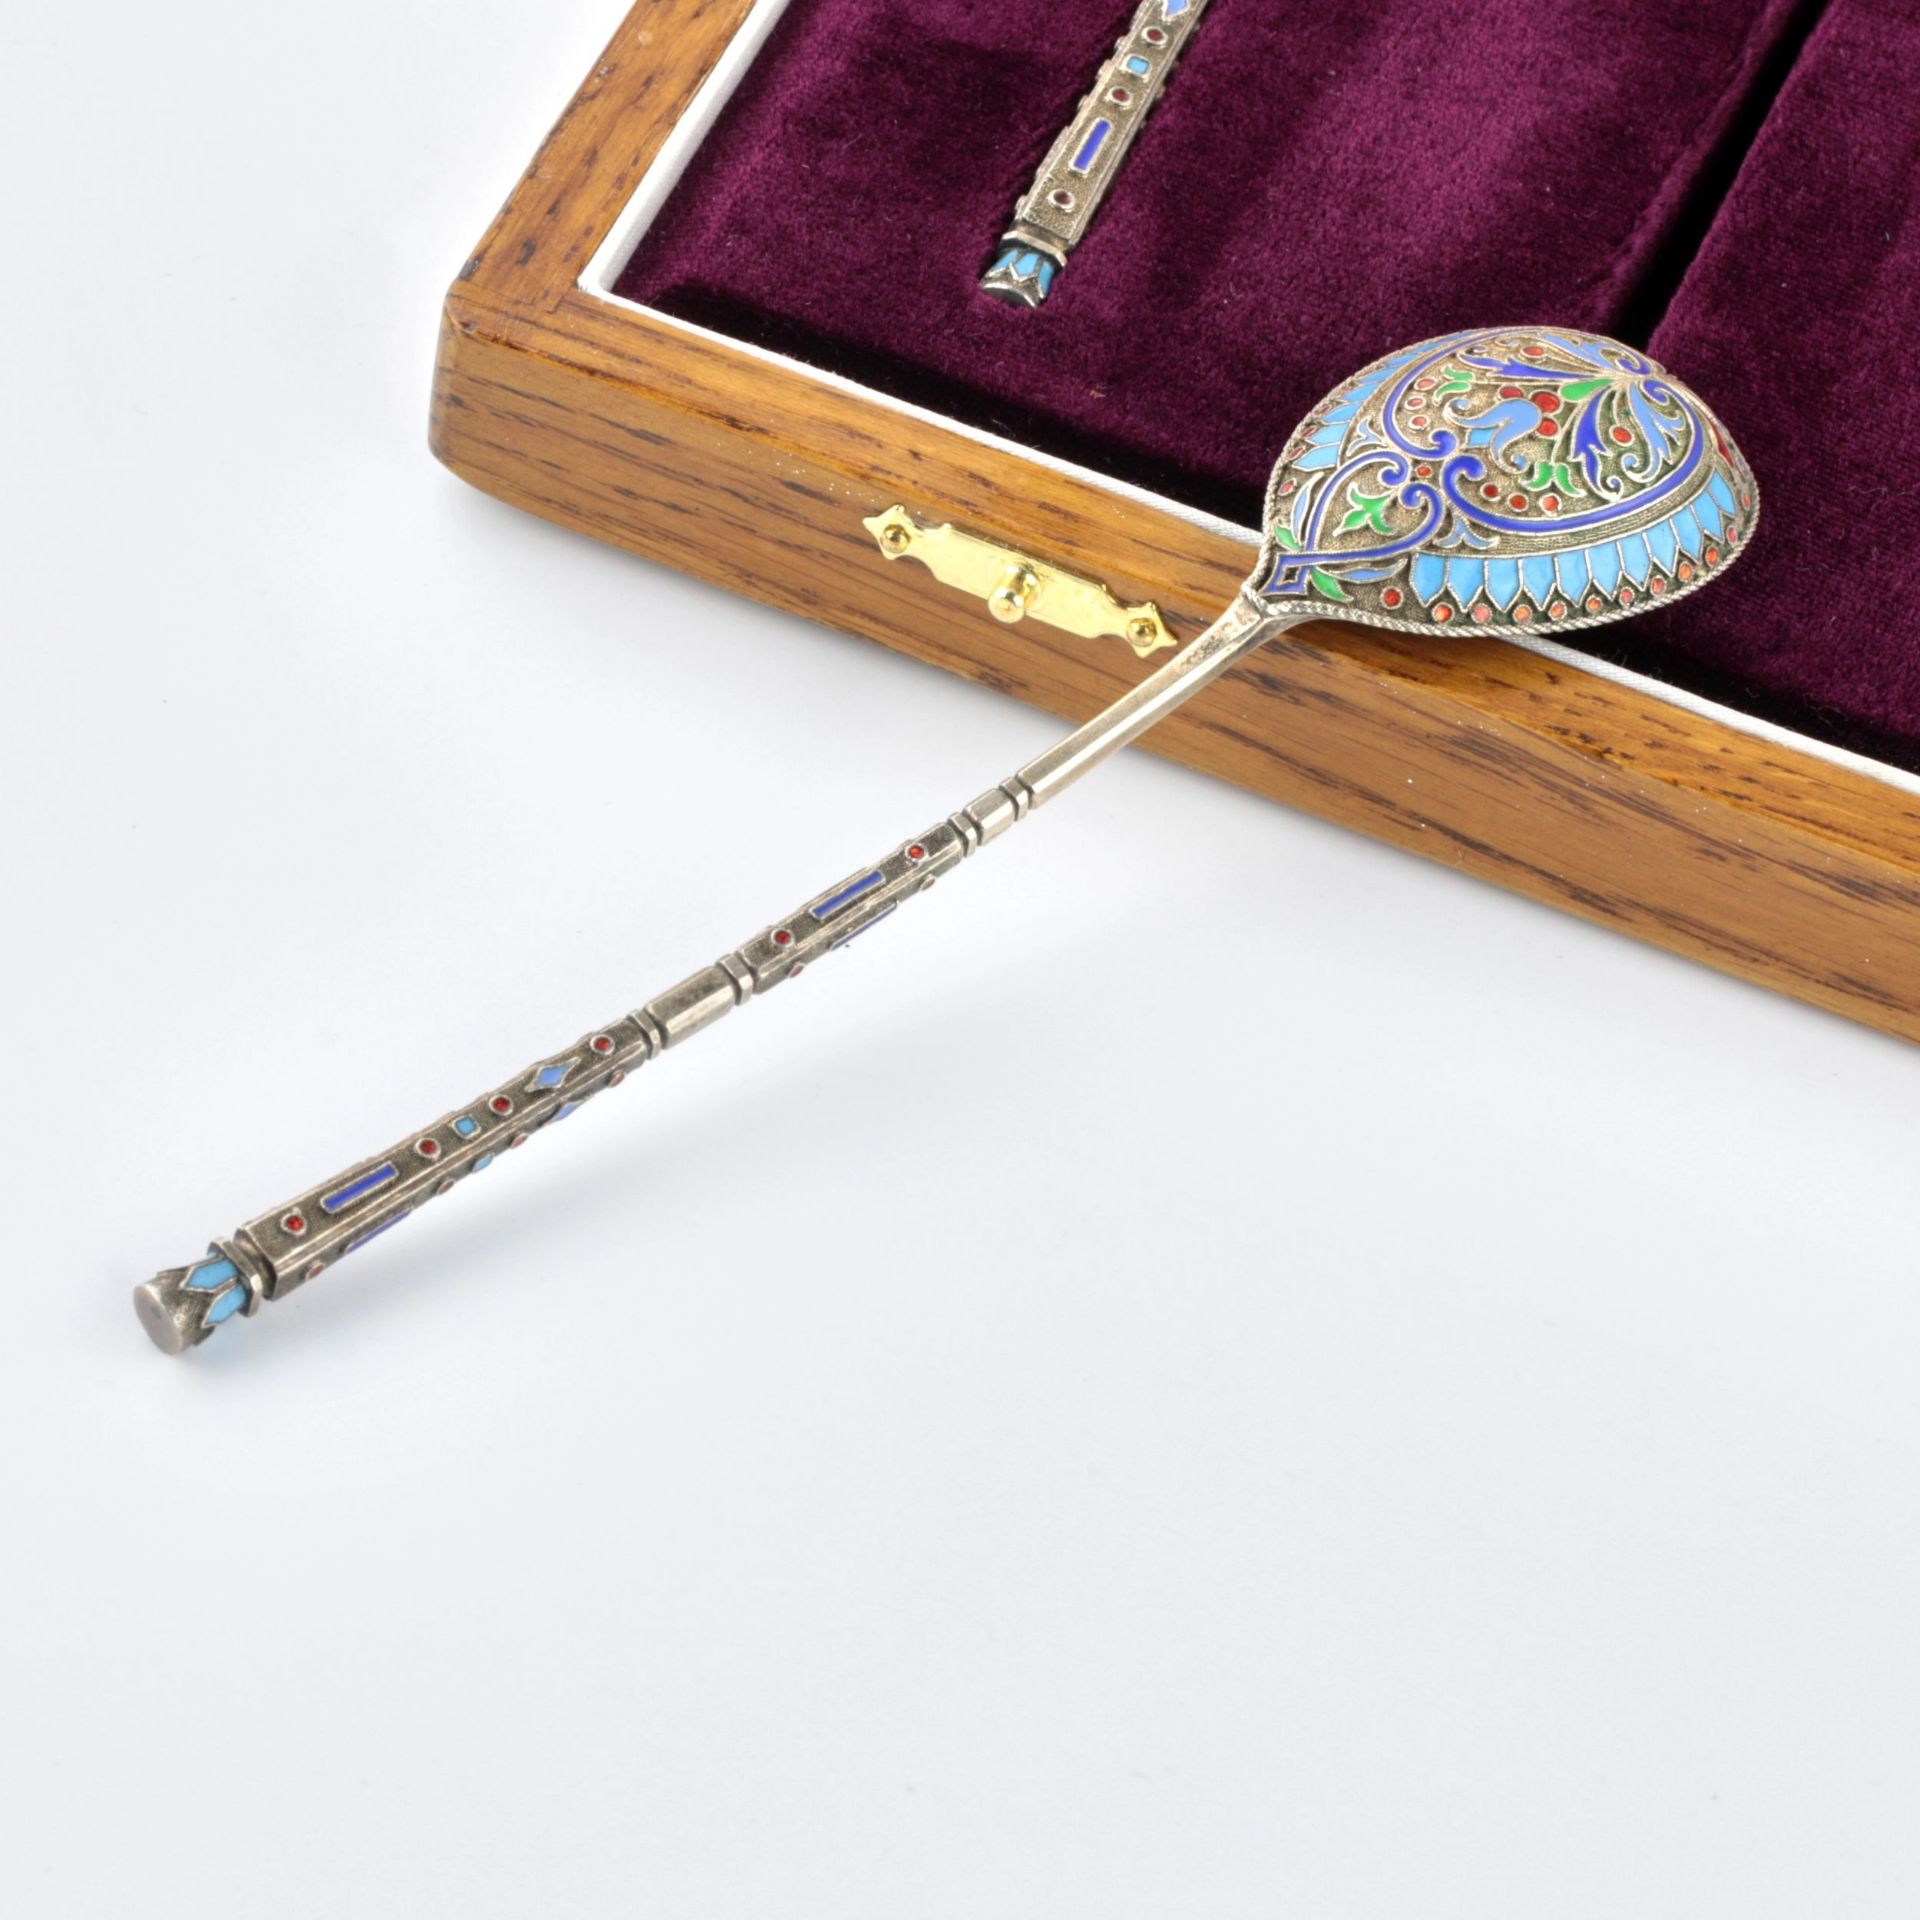 A set of Grachev`s teaspoons in their own case. - Image 7 of 9